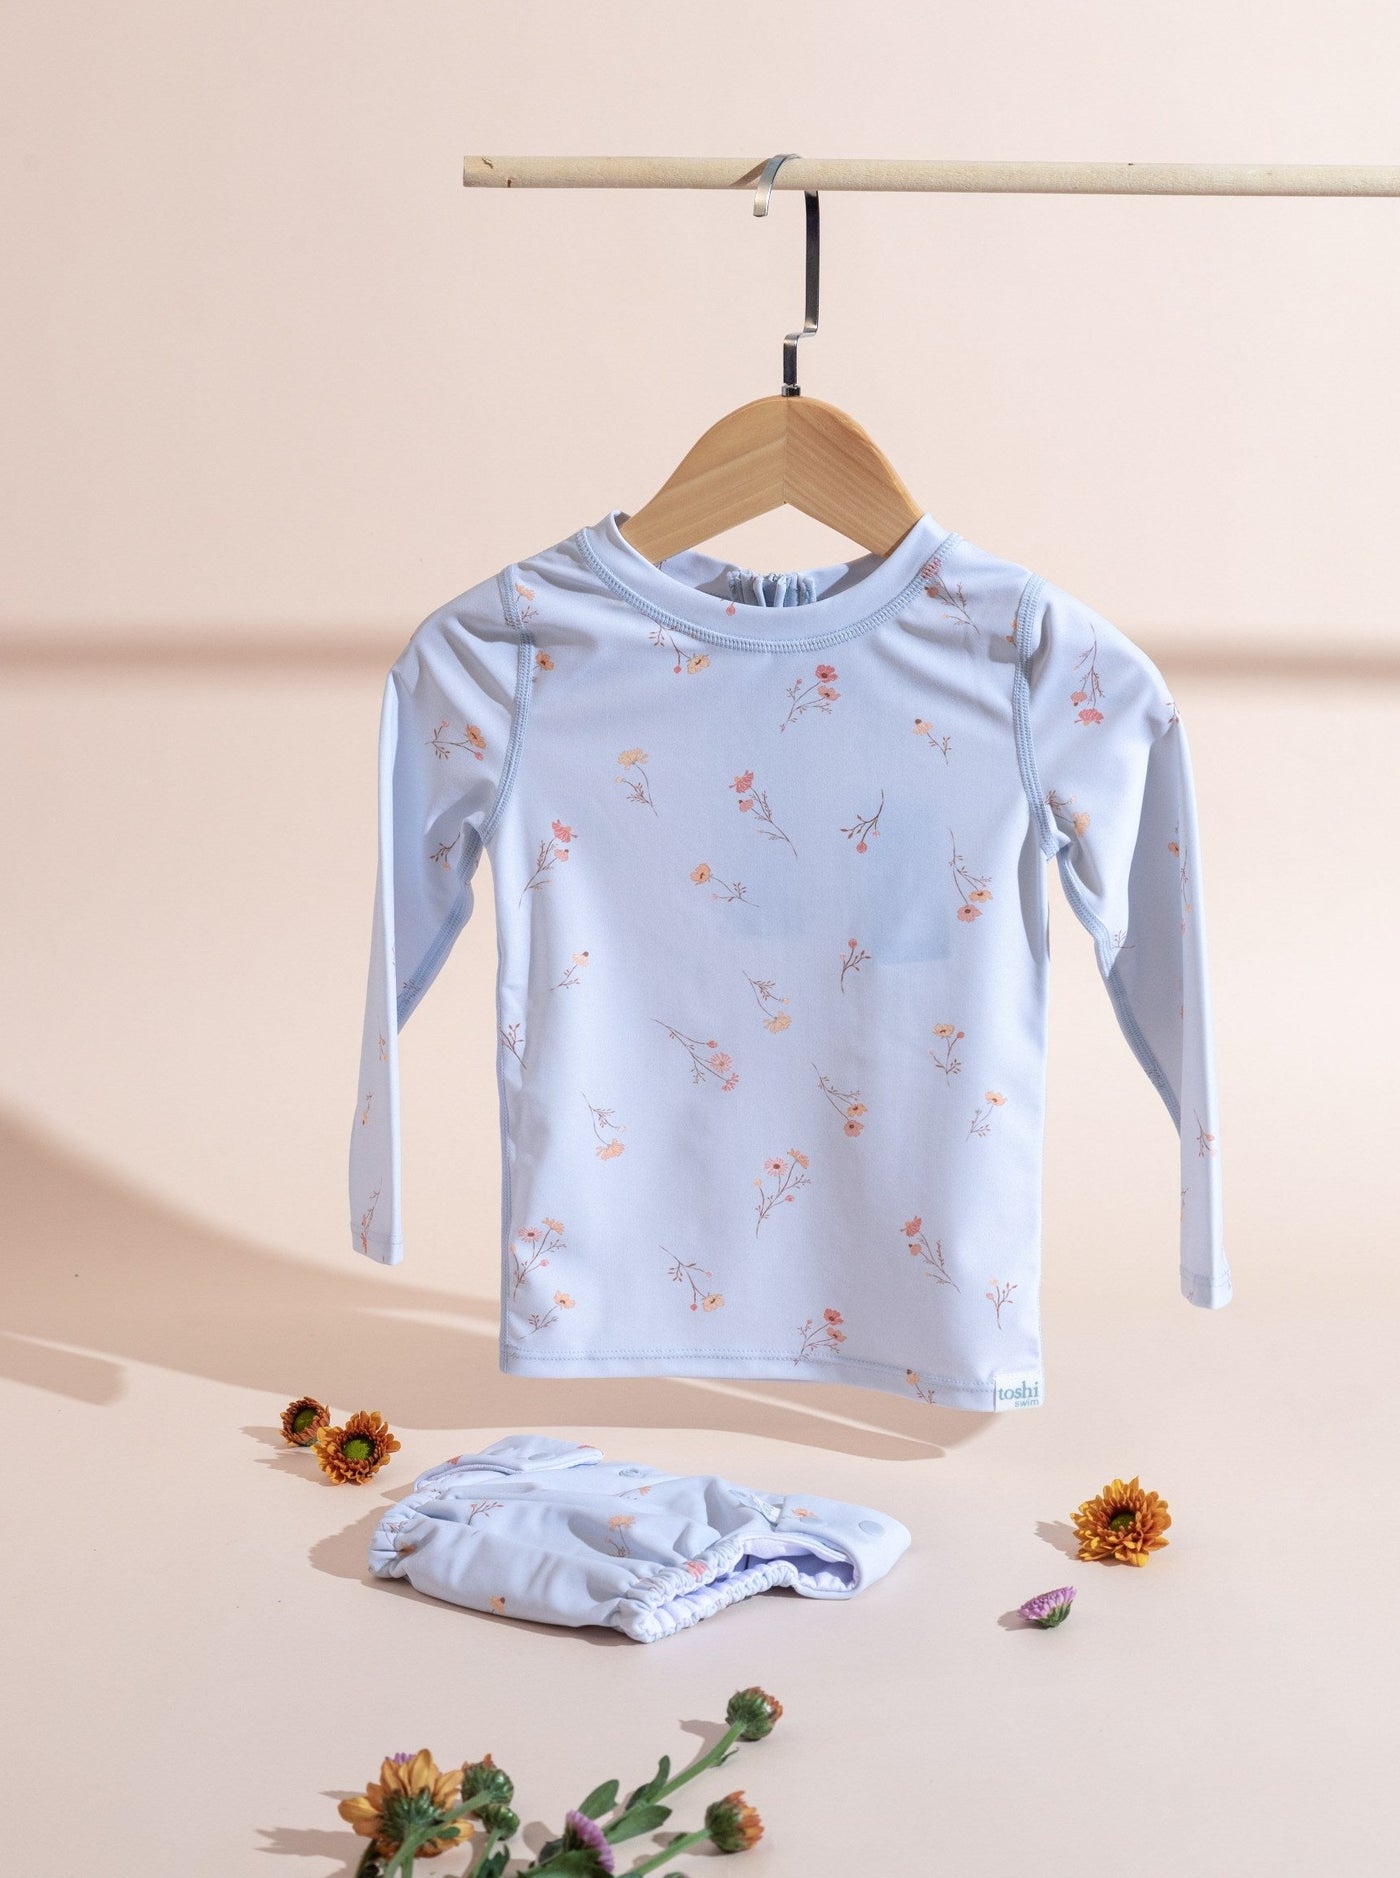 toshi baby swim rash guard and diapers in blue floral prints